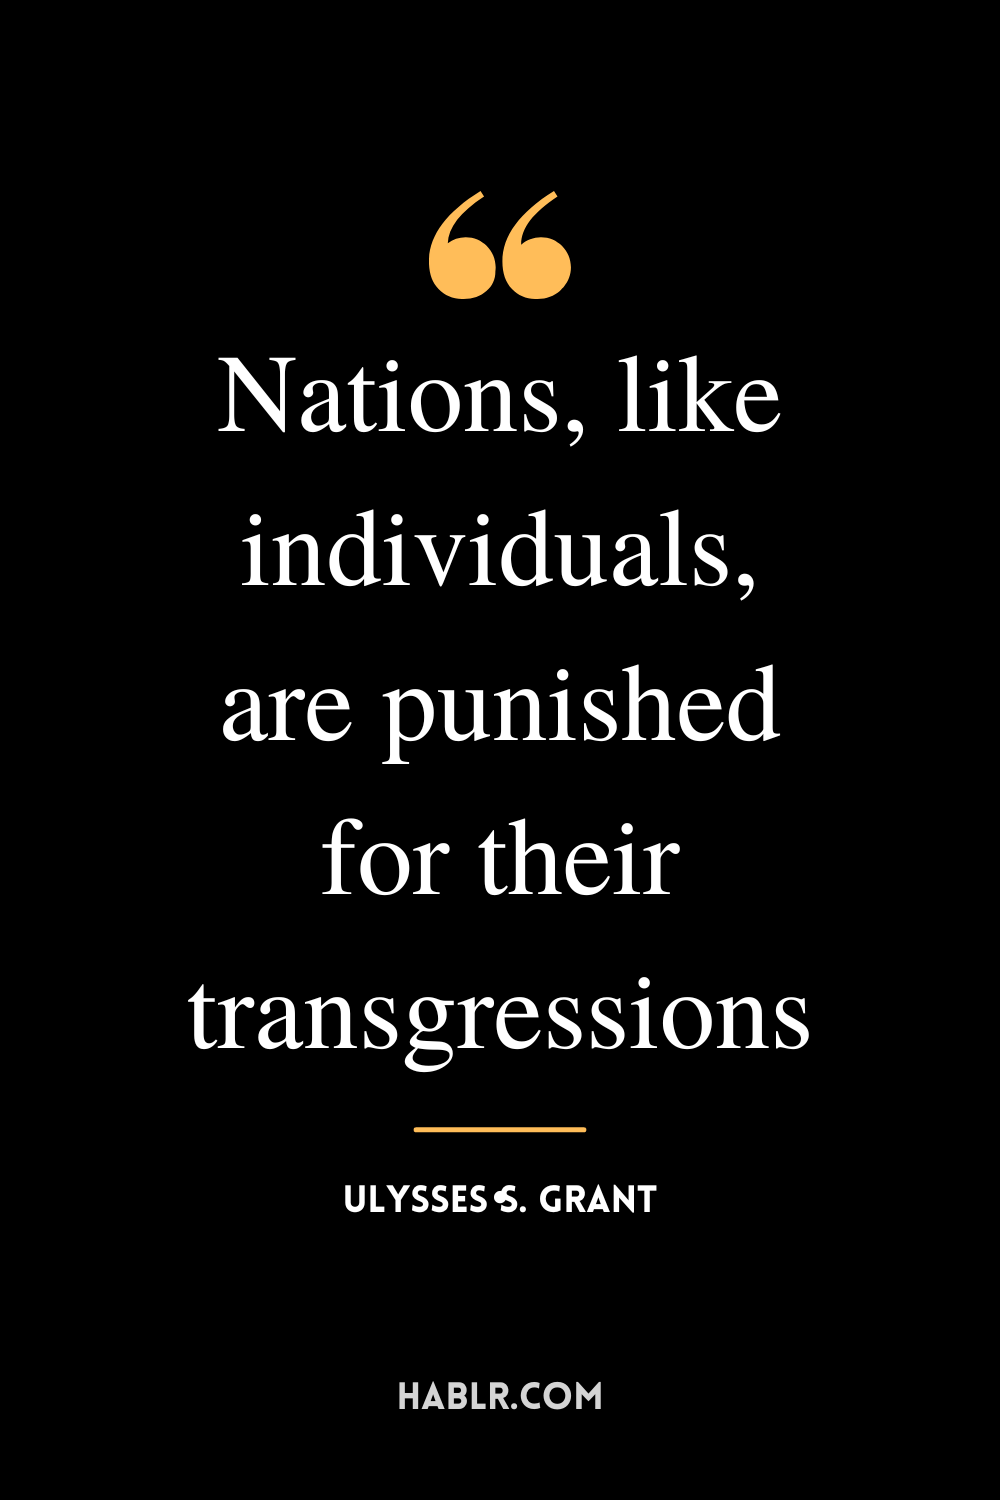 “Nations, like individuals, are punished for their transgressions.” -Ulysses S. Grant